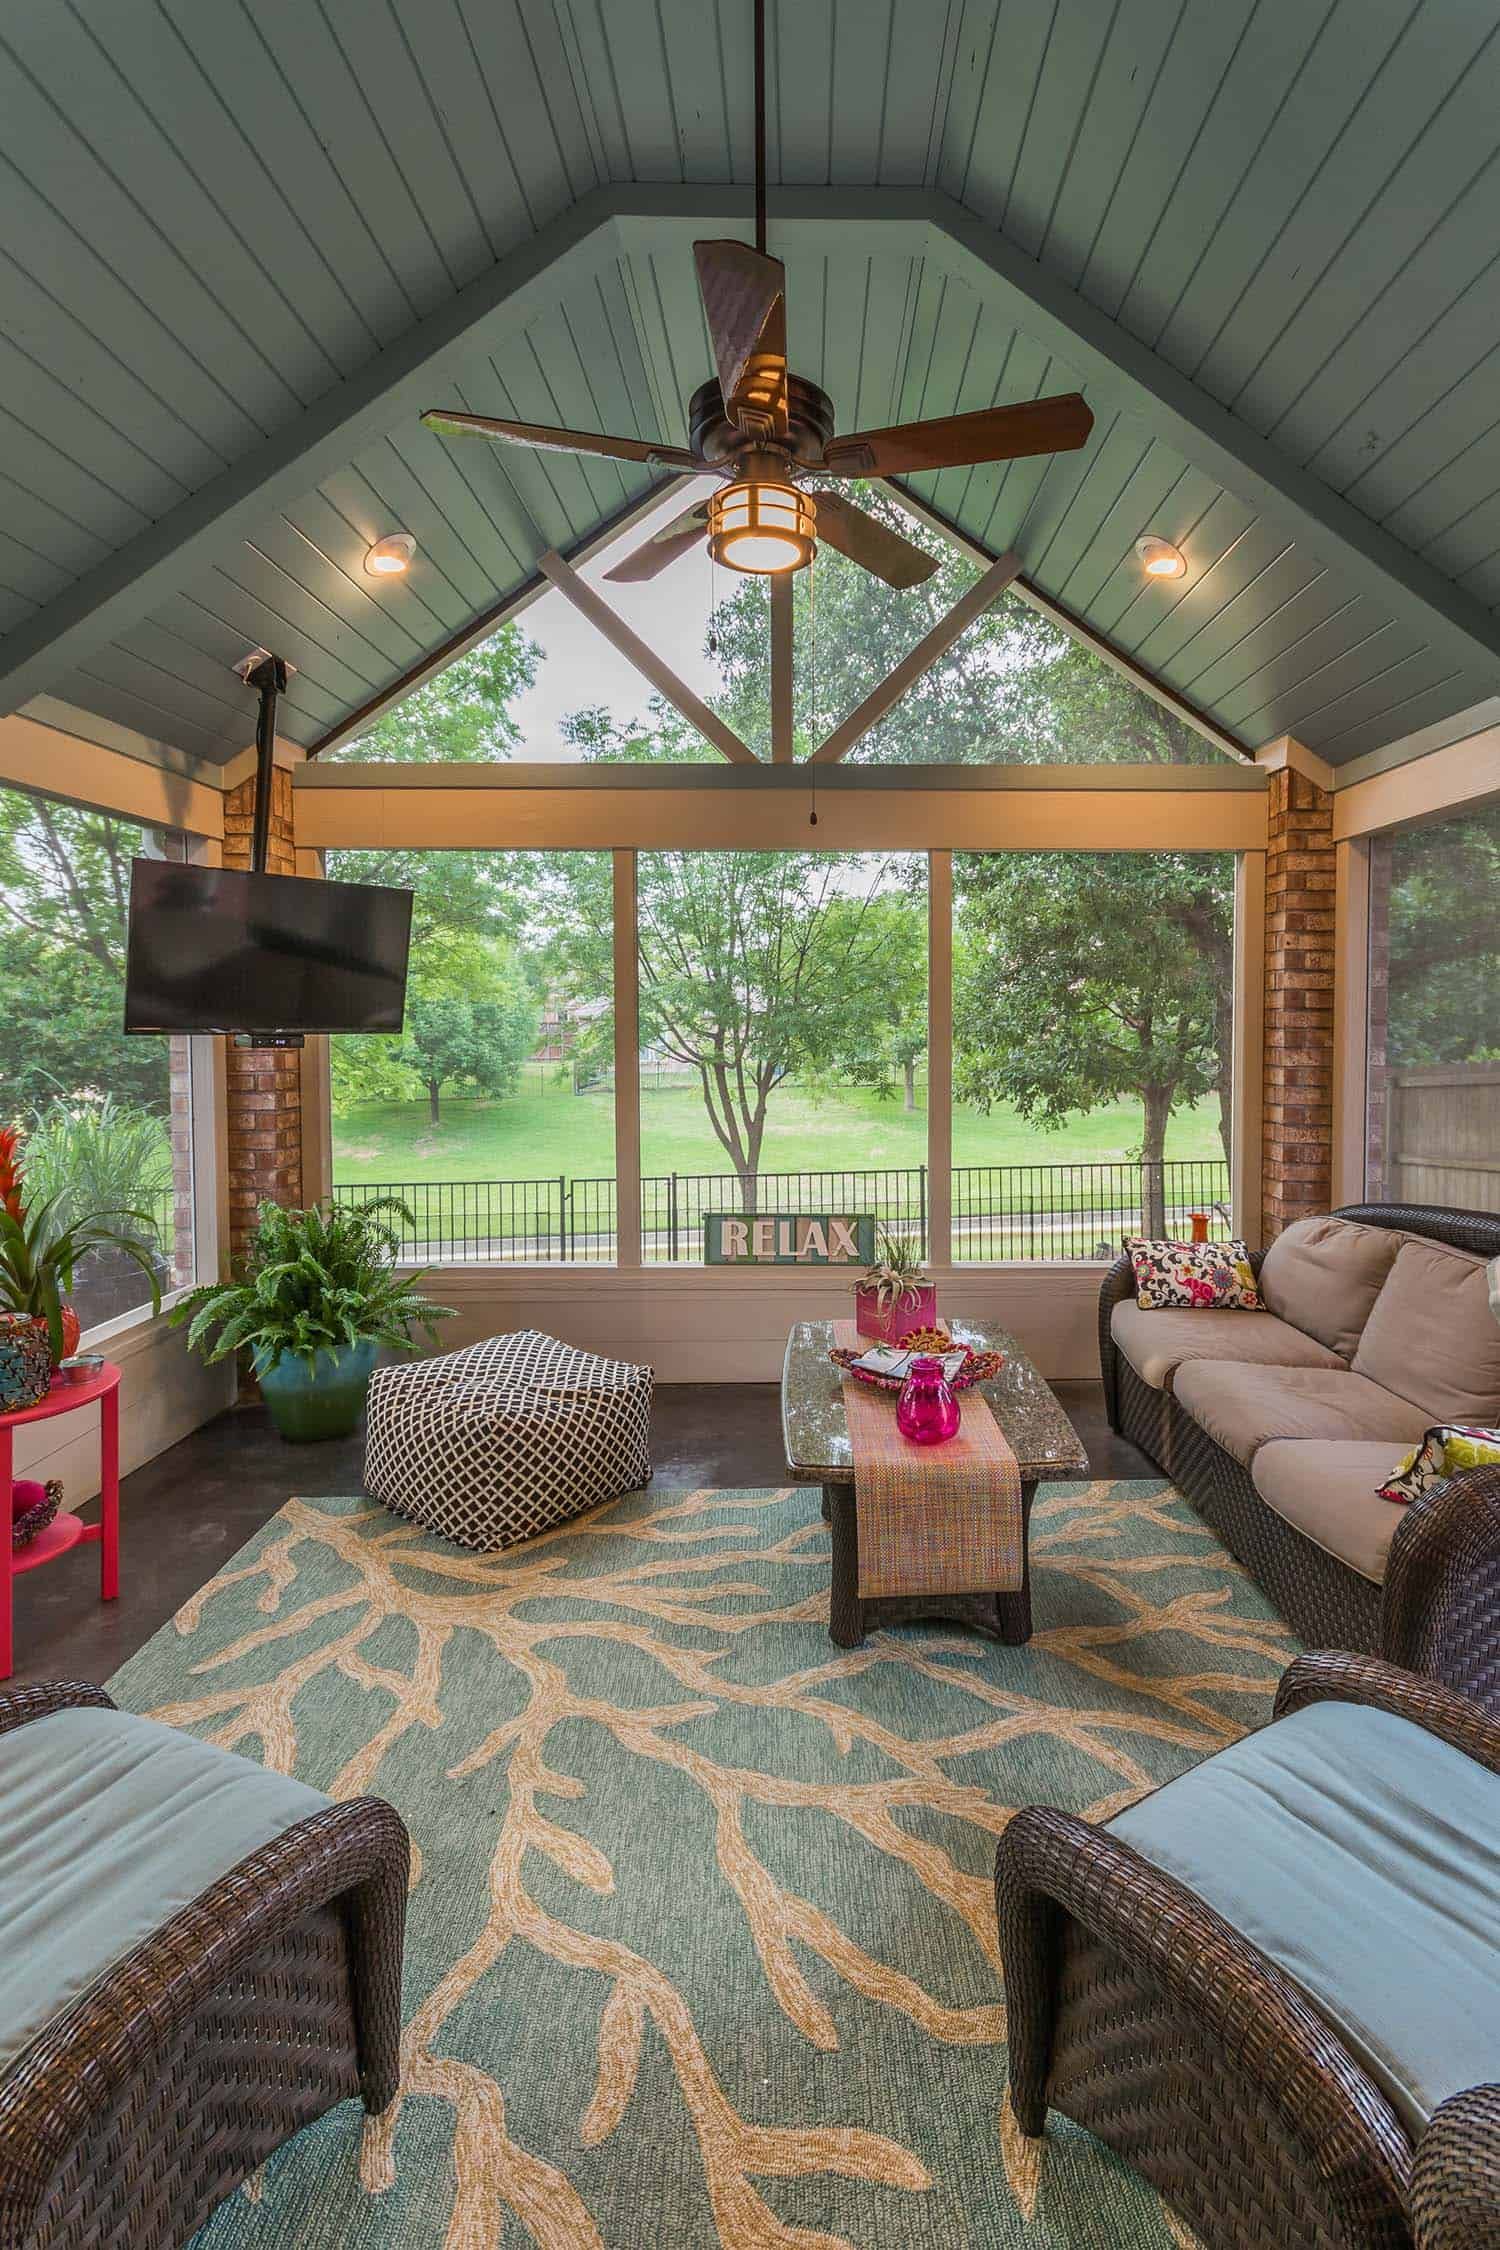 Screened In Porch Ideas with Stunning
Design Concept